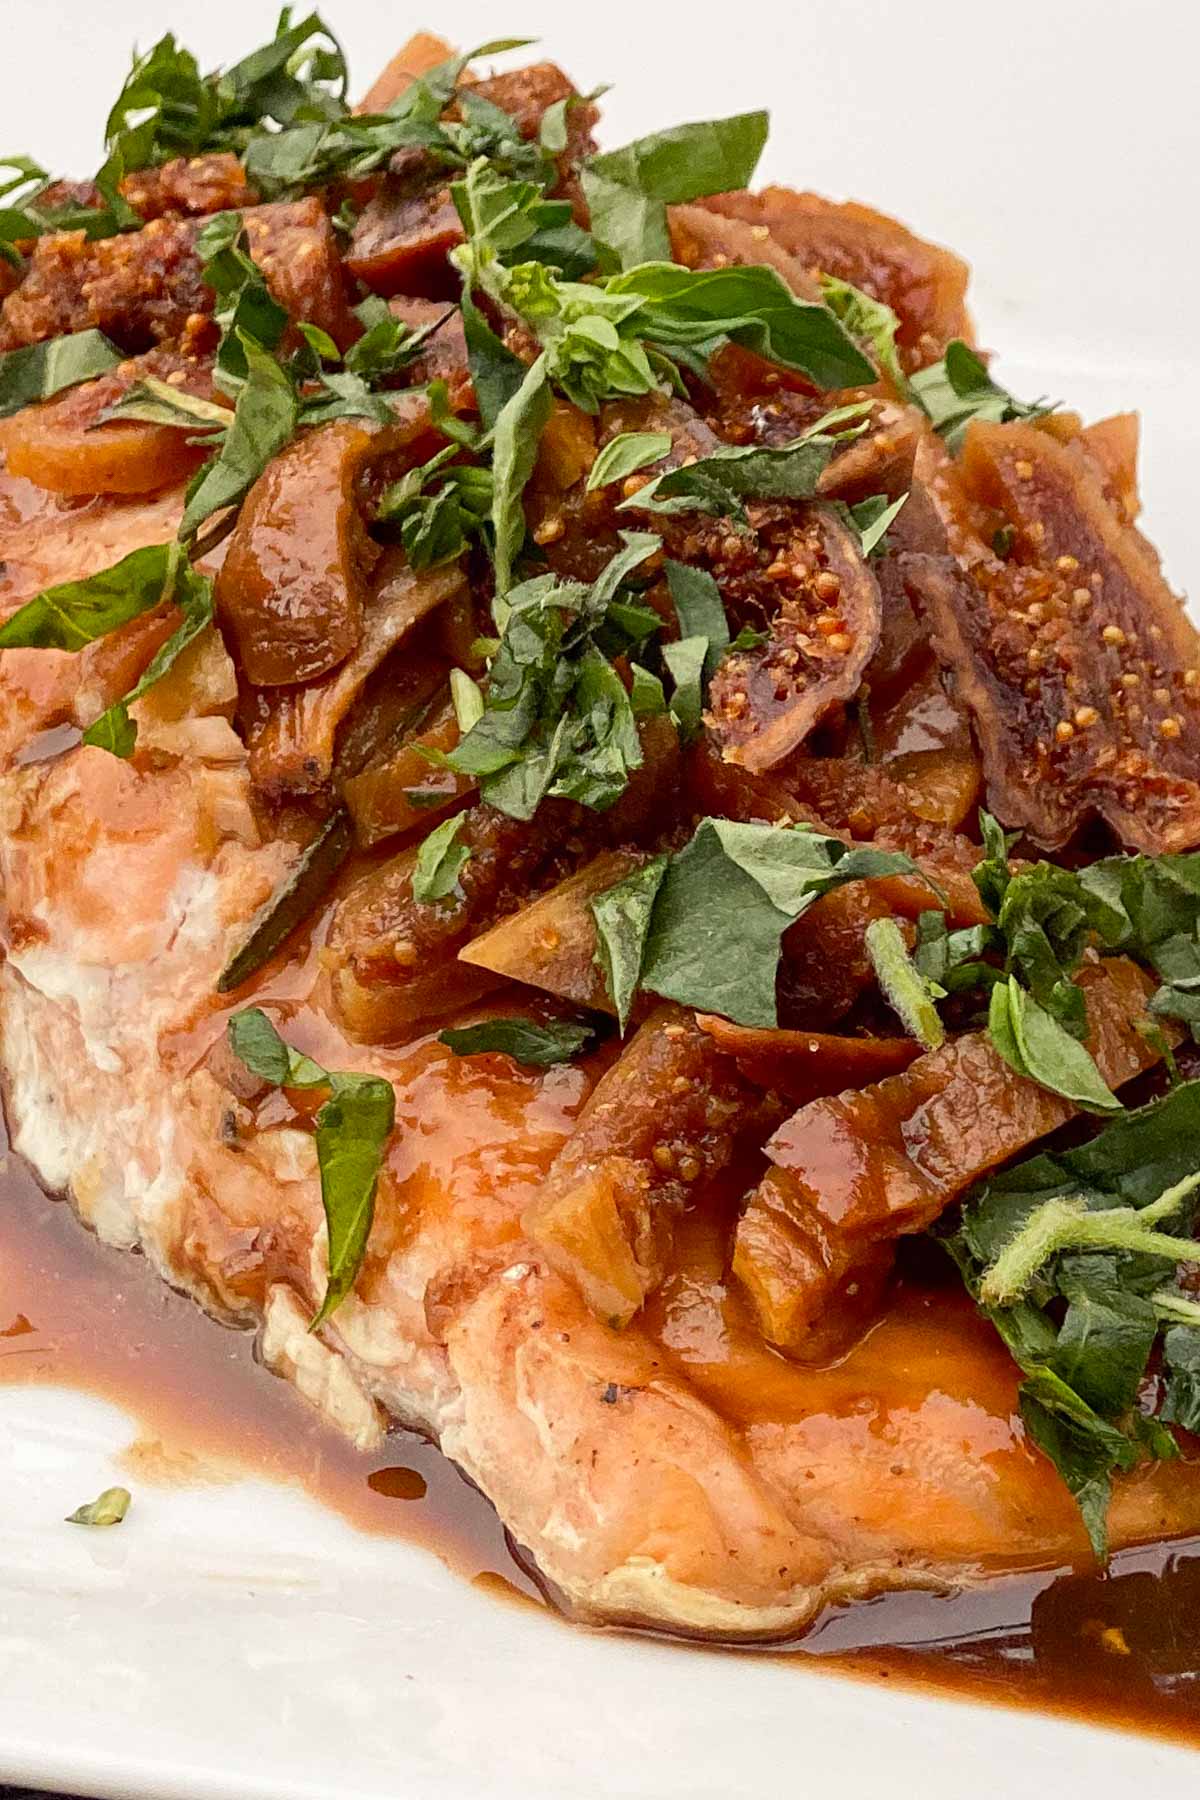 Baked salmon fillet topped with balsamic glaze, sliced figs and fresh herbs.